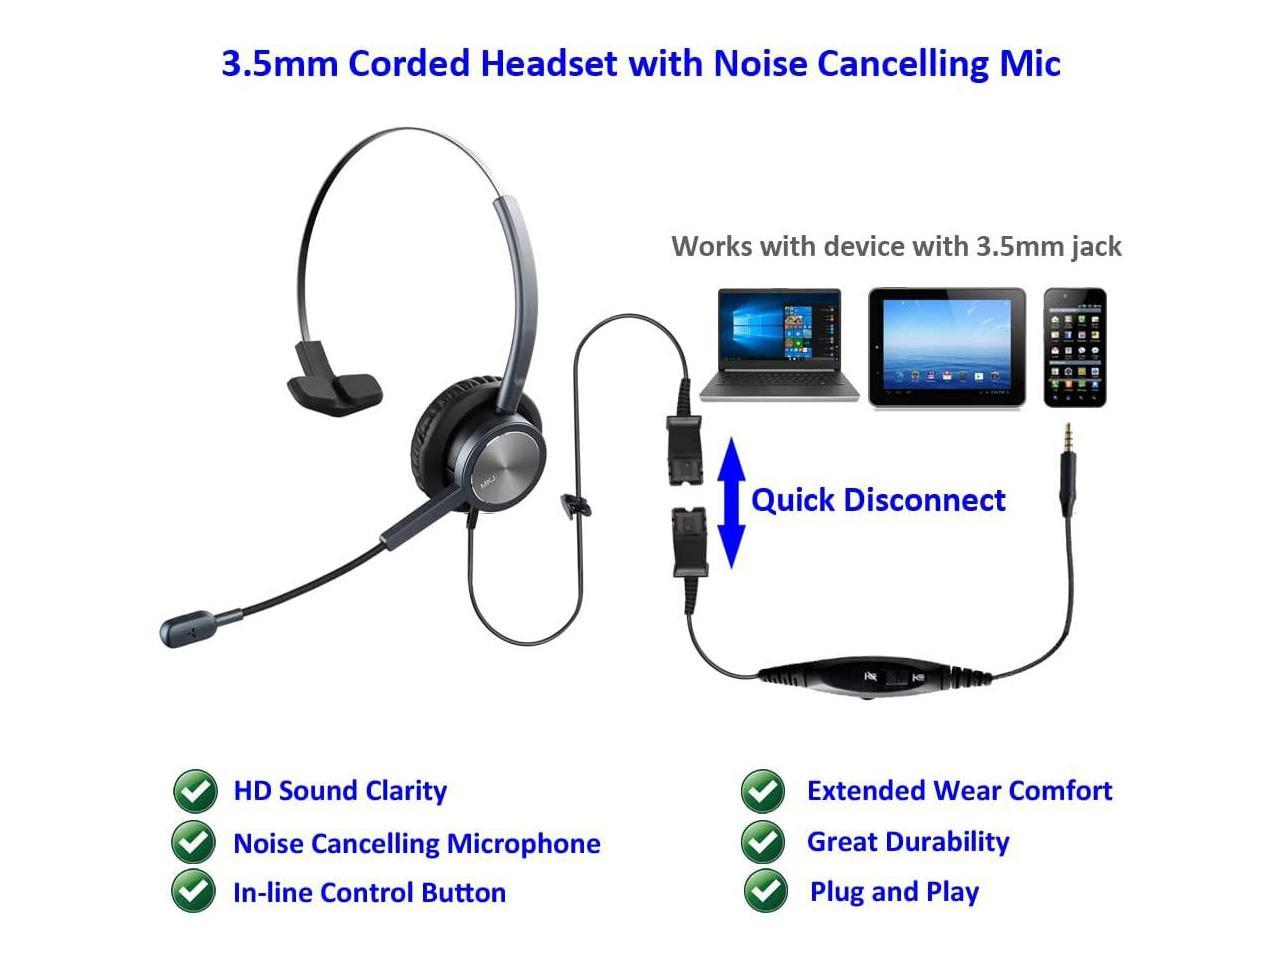 MAIRDI Cell Phone Headset with Nosie Cancelling Microphone Mono 3.5mm Jack Headset with Mic Mute Volume Control for Mobiles Apple iPhone Samsung BlackBerry Androids 